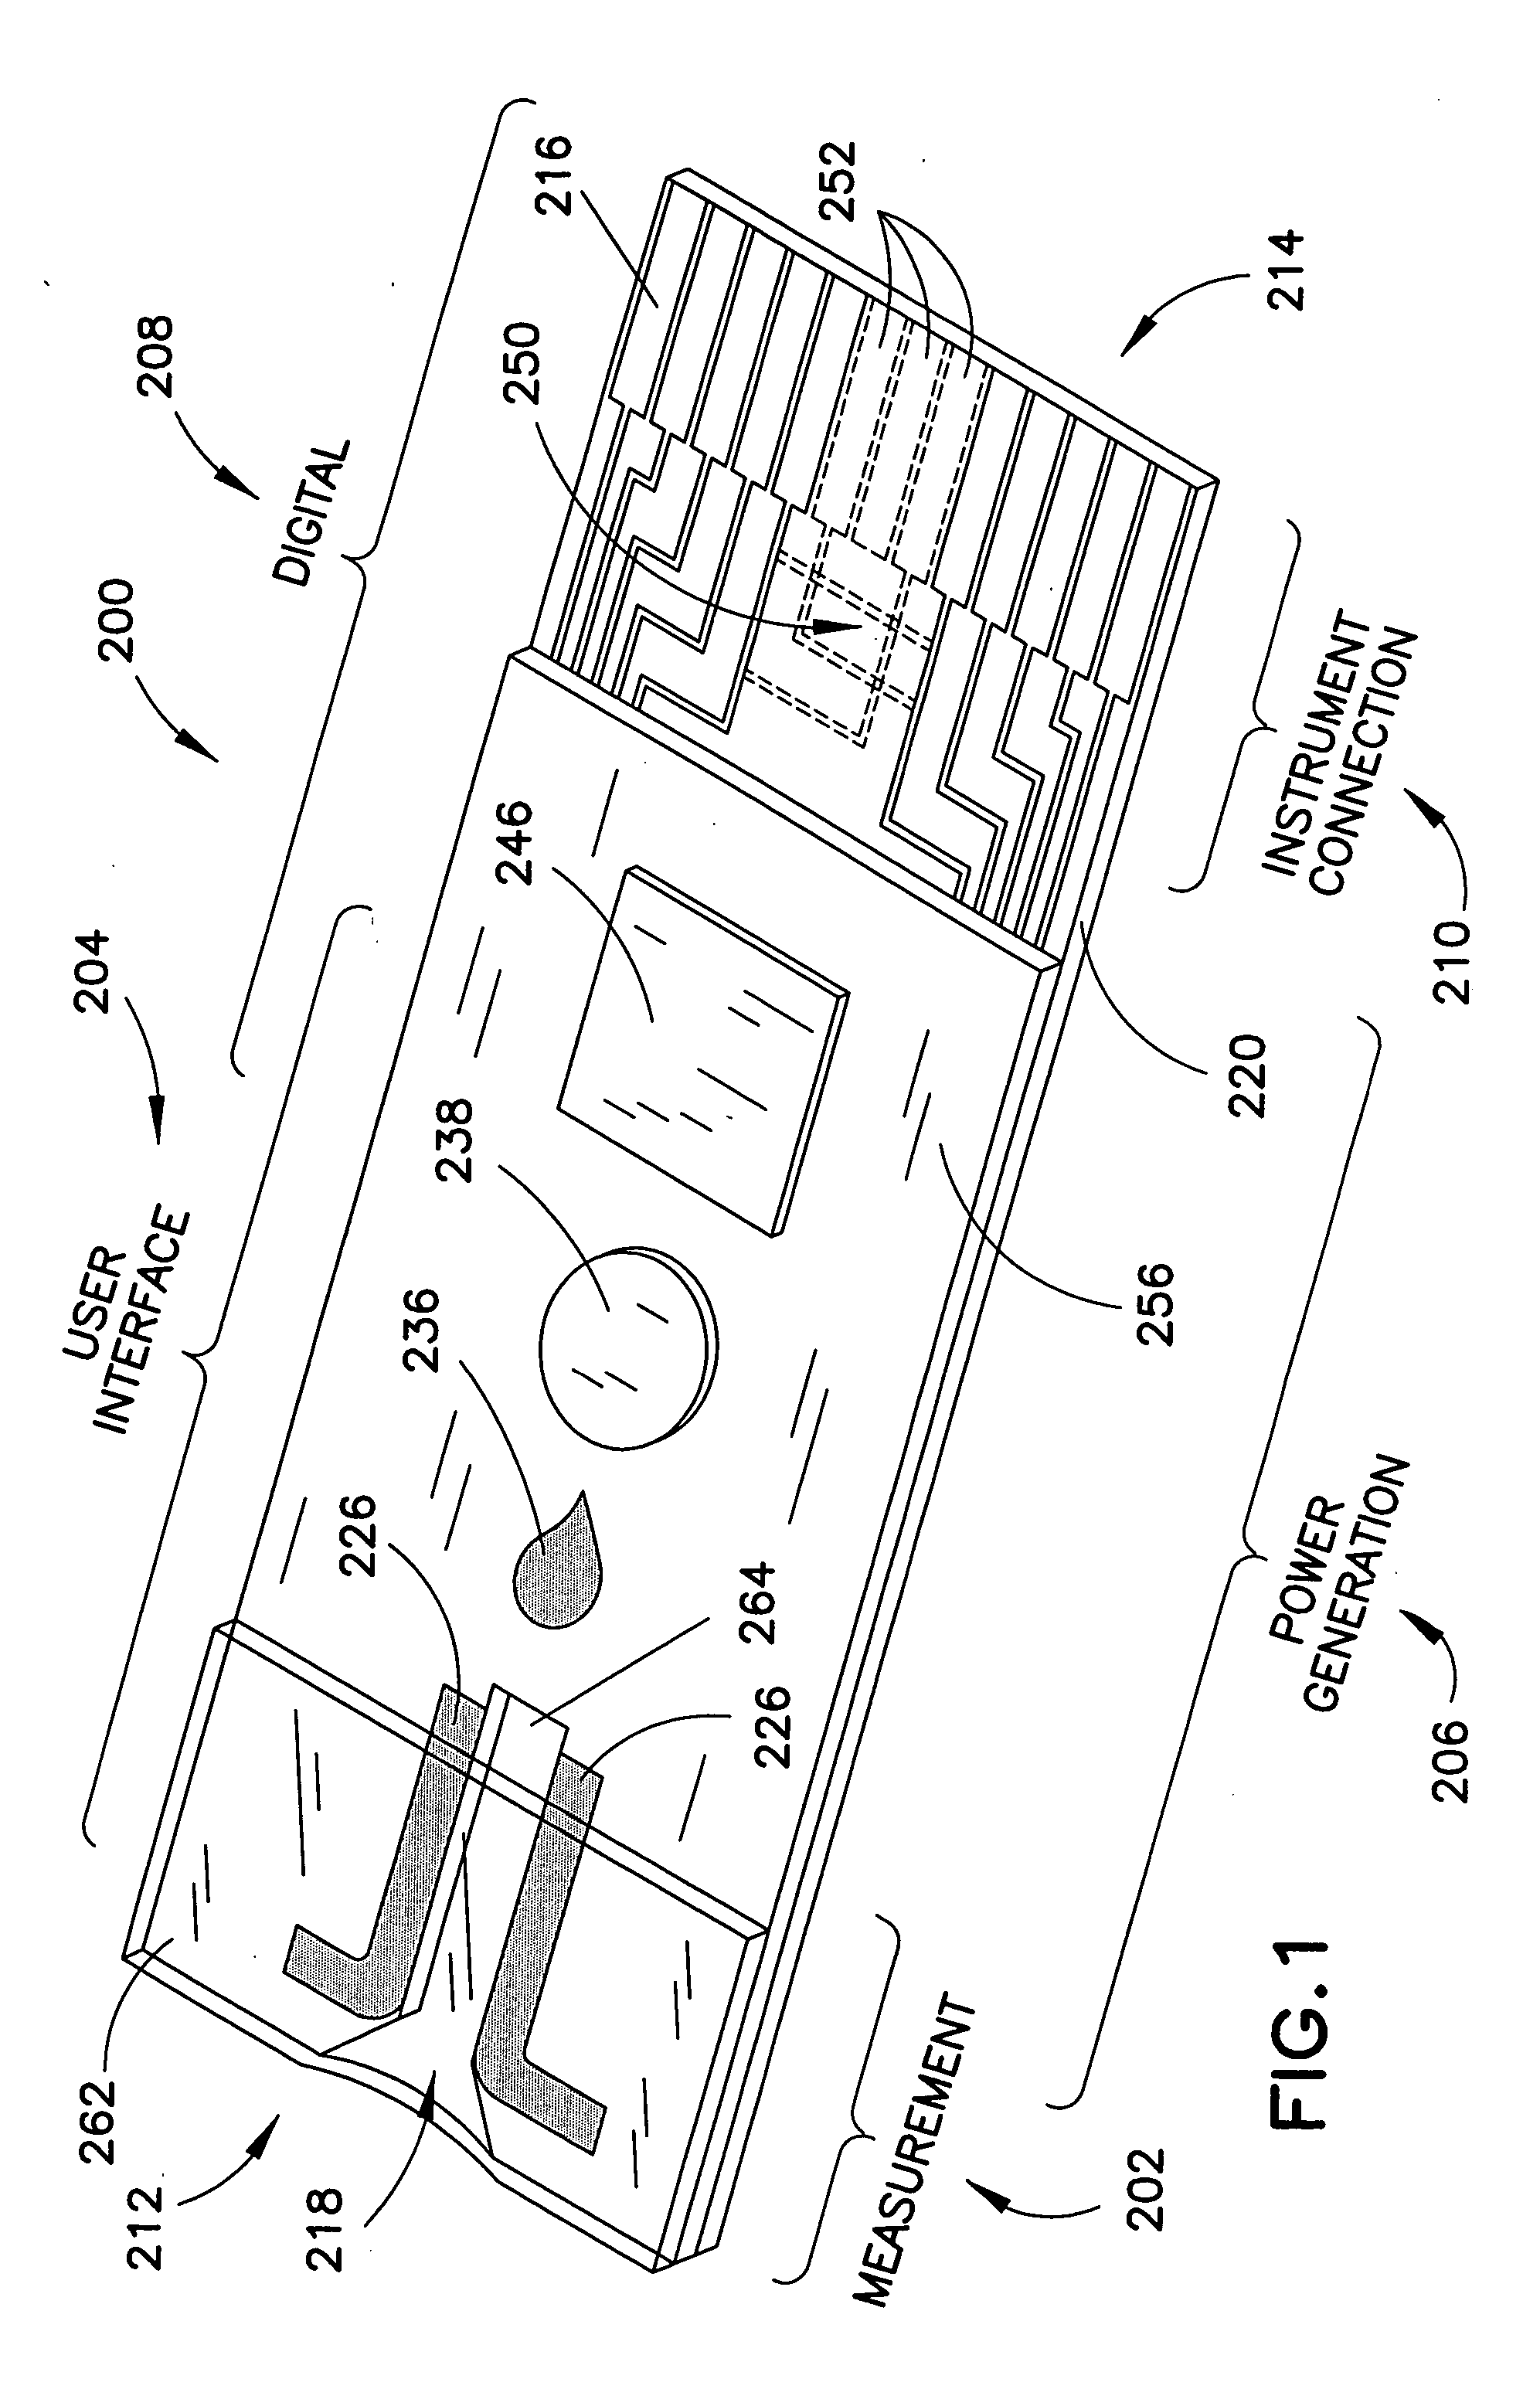 Biosensor with multiple electrical functionalities